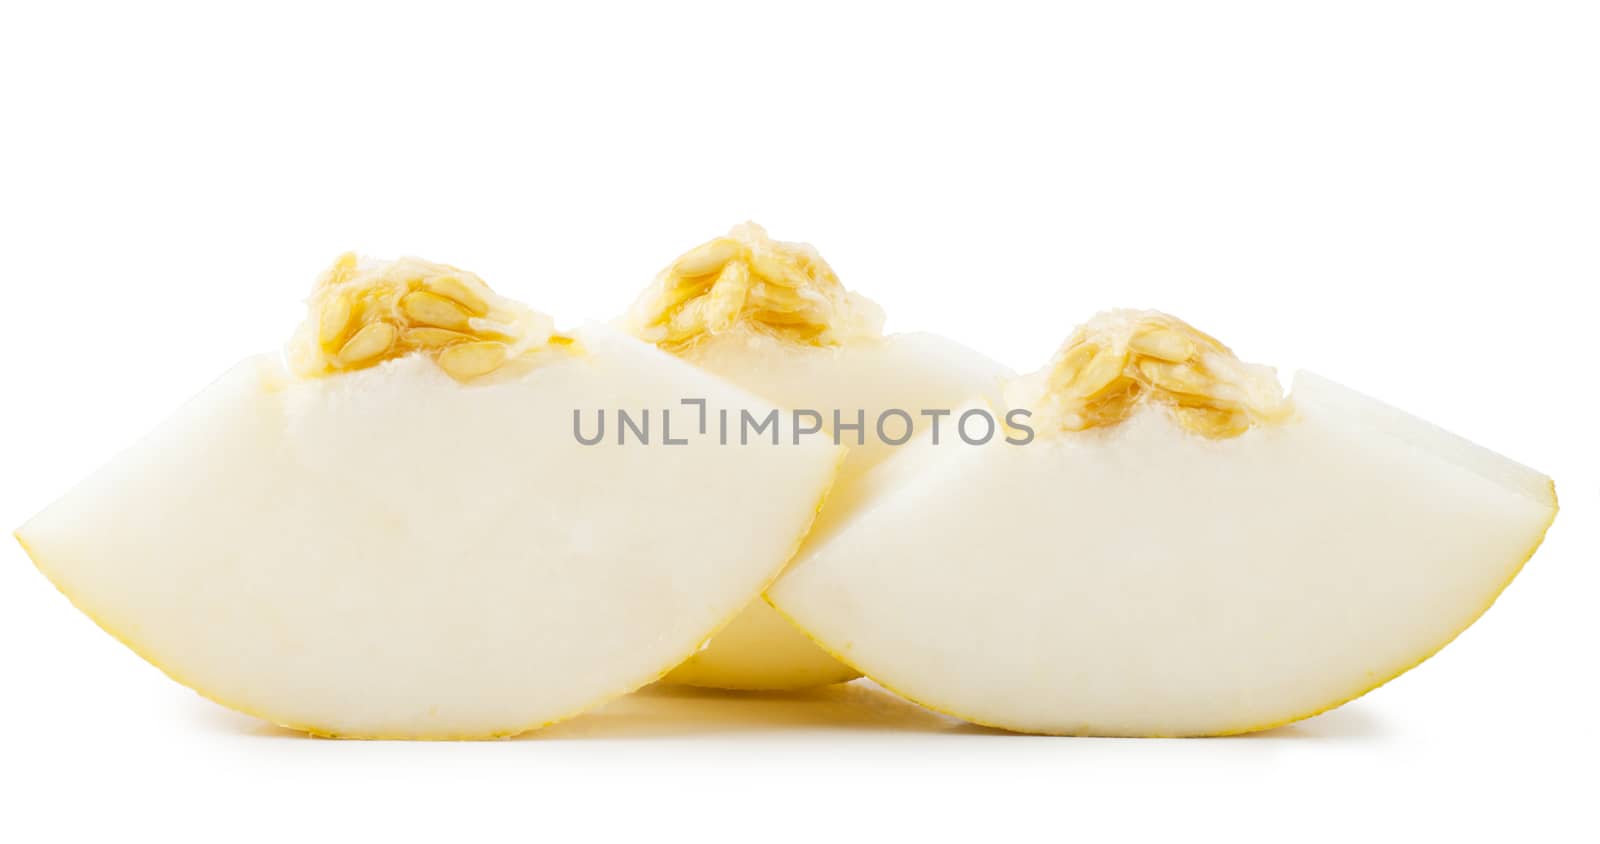 Pieces of juicy melon over white background